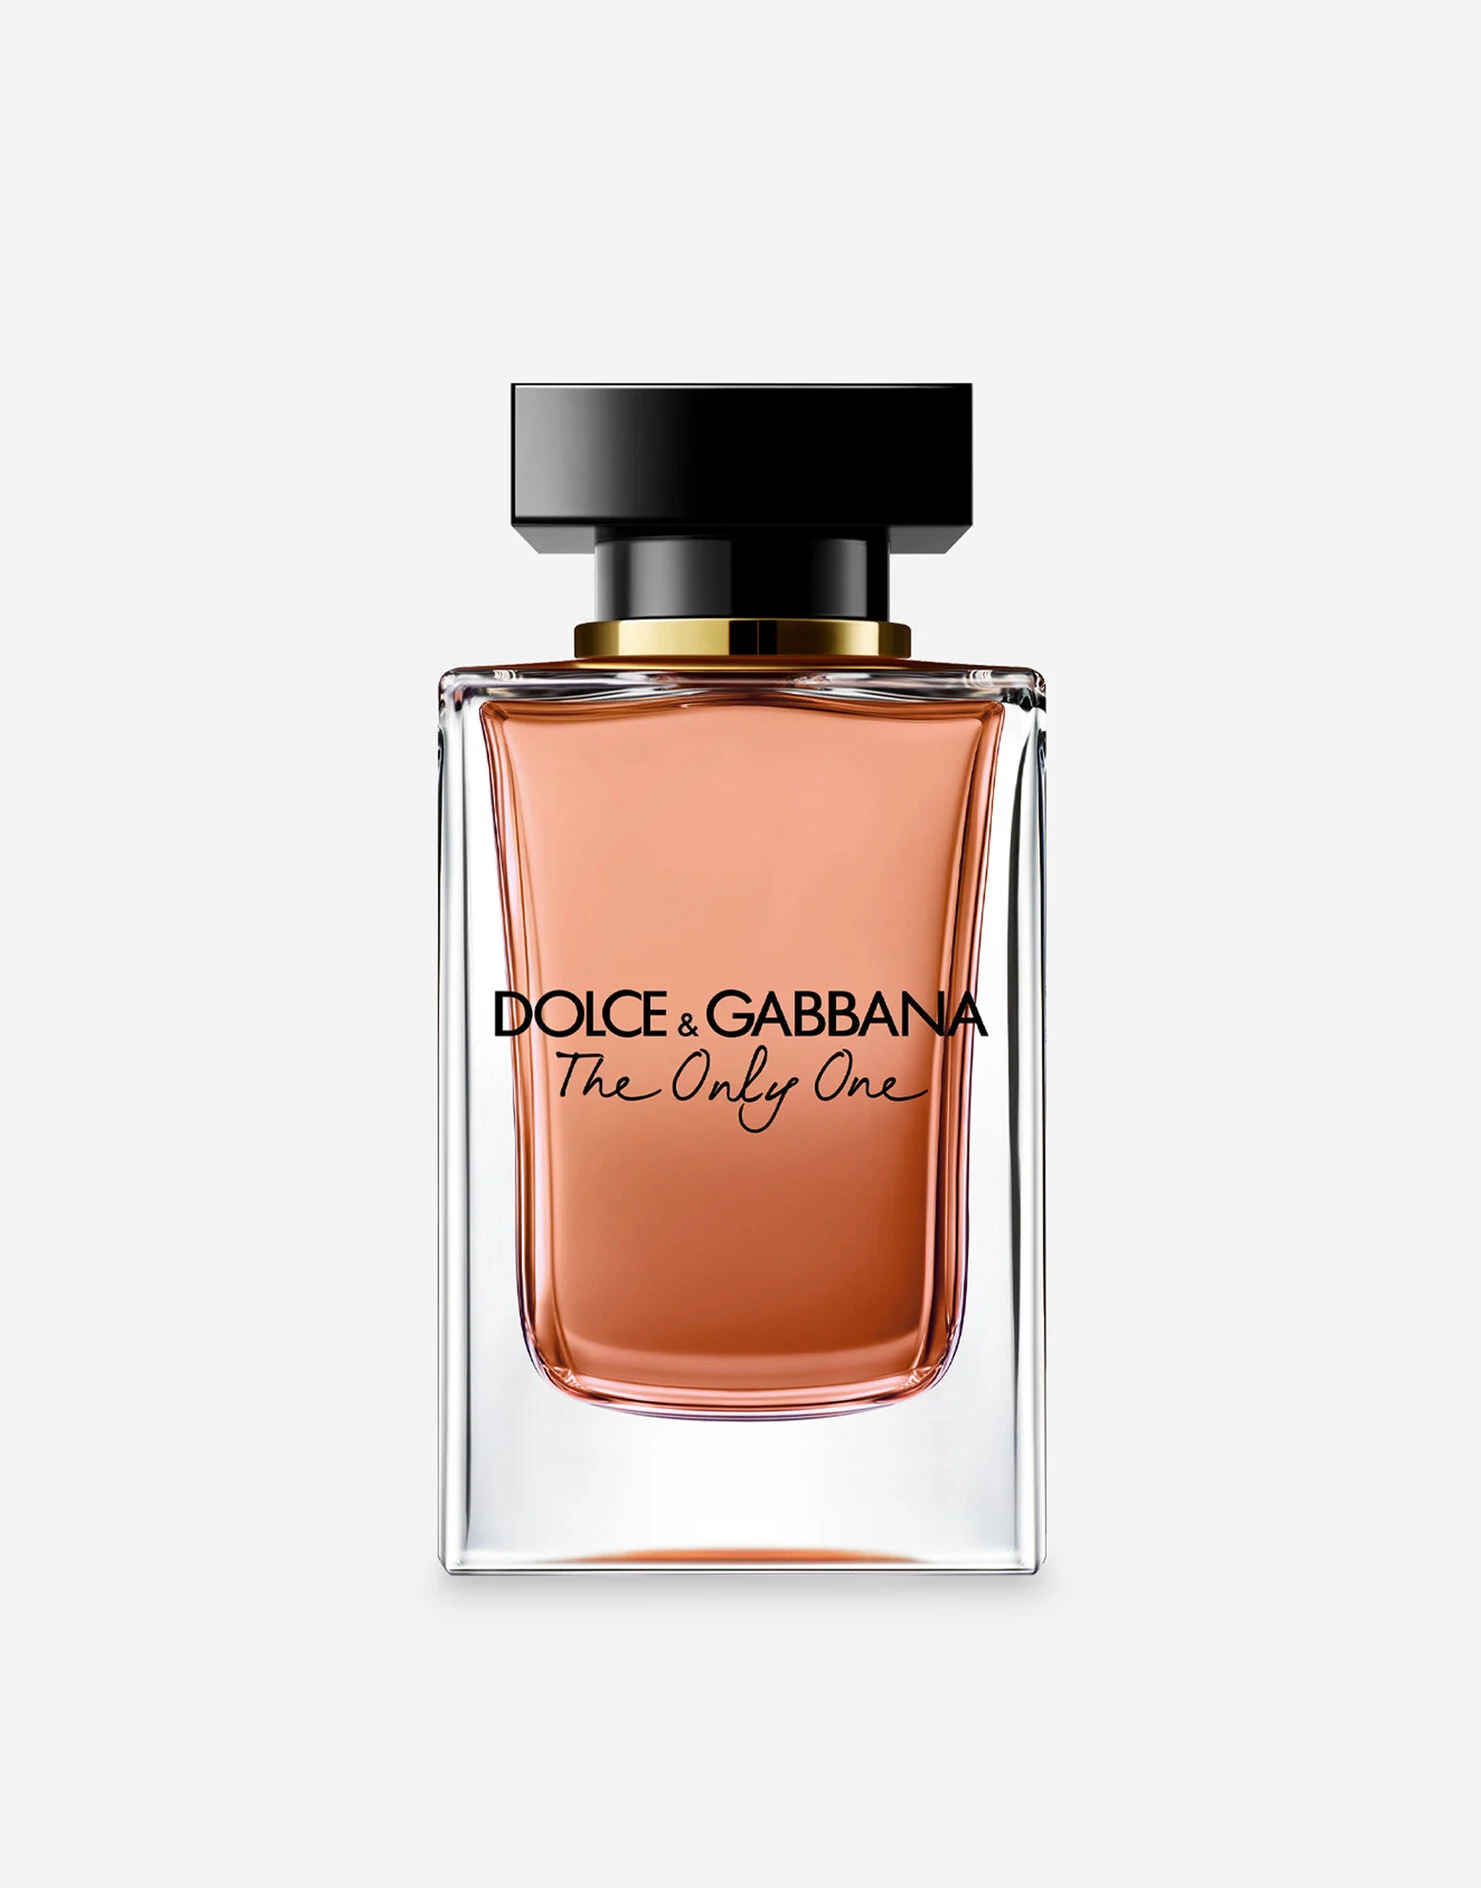 The Only One de Dolce & Gabbana